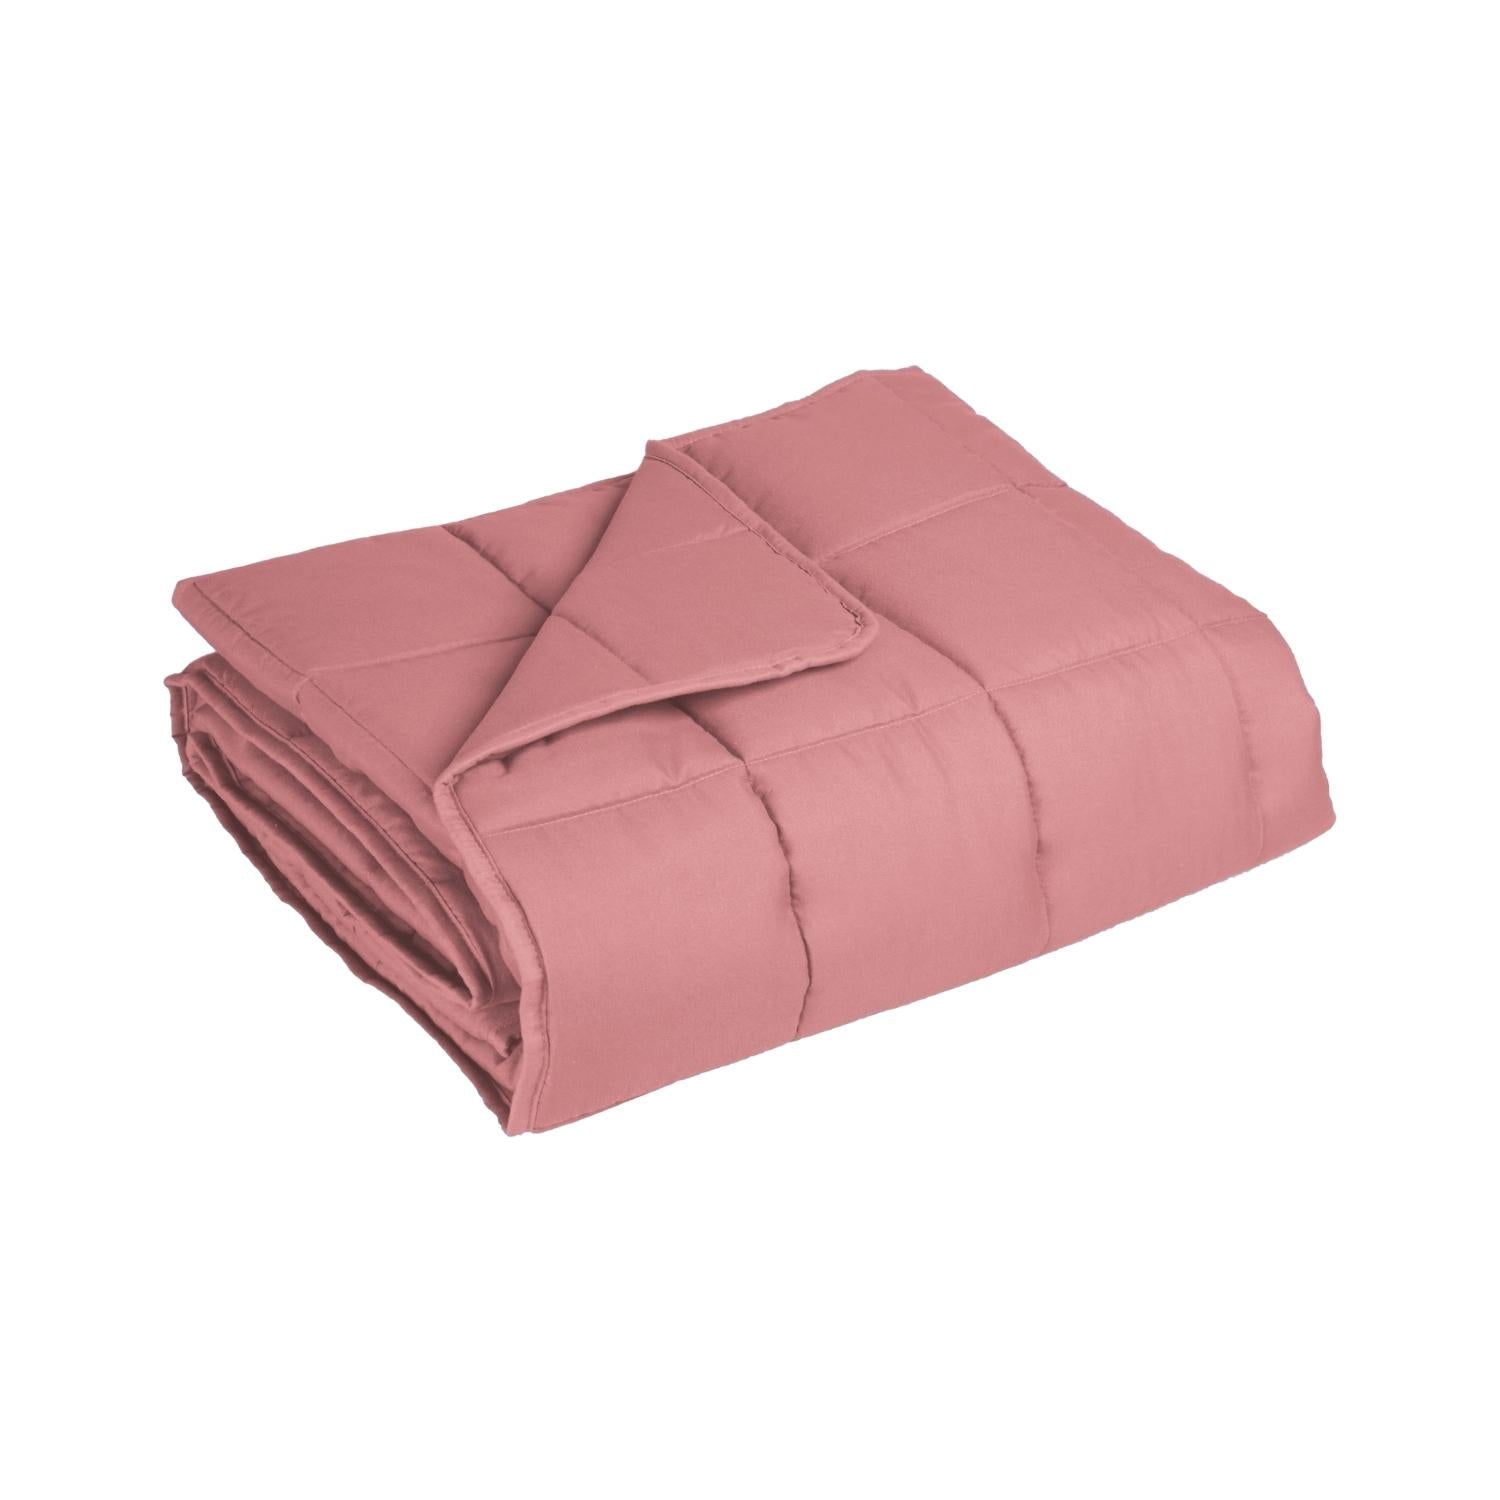 Gominimo Weighted Blanket 9KG Light Pink